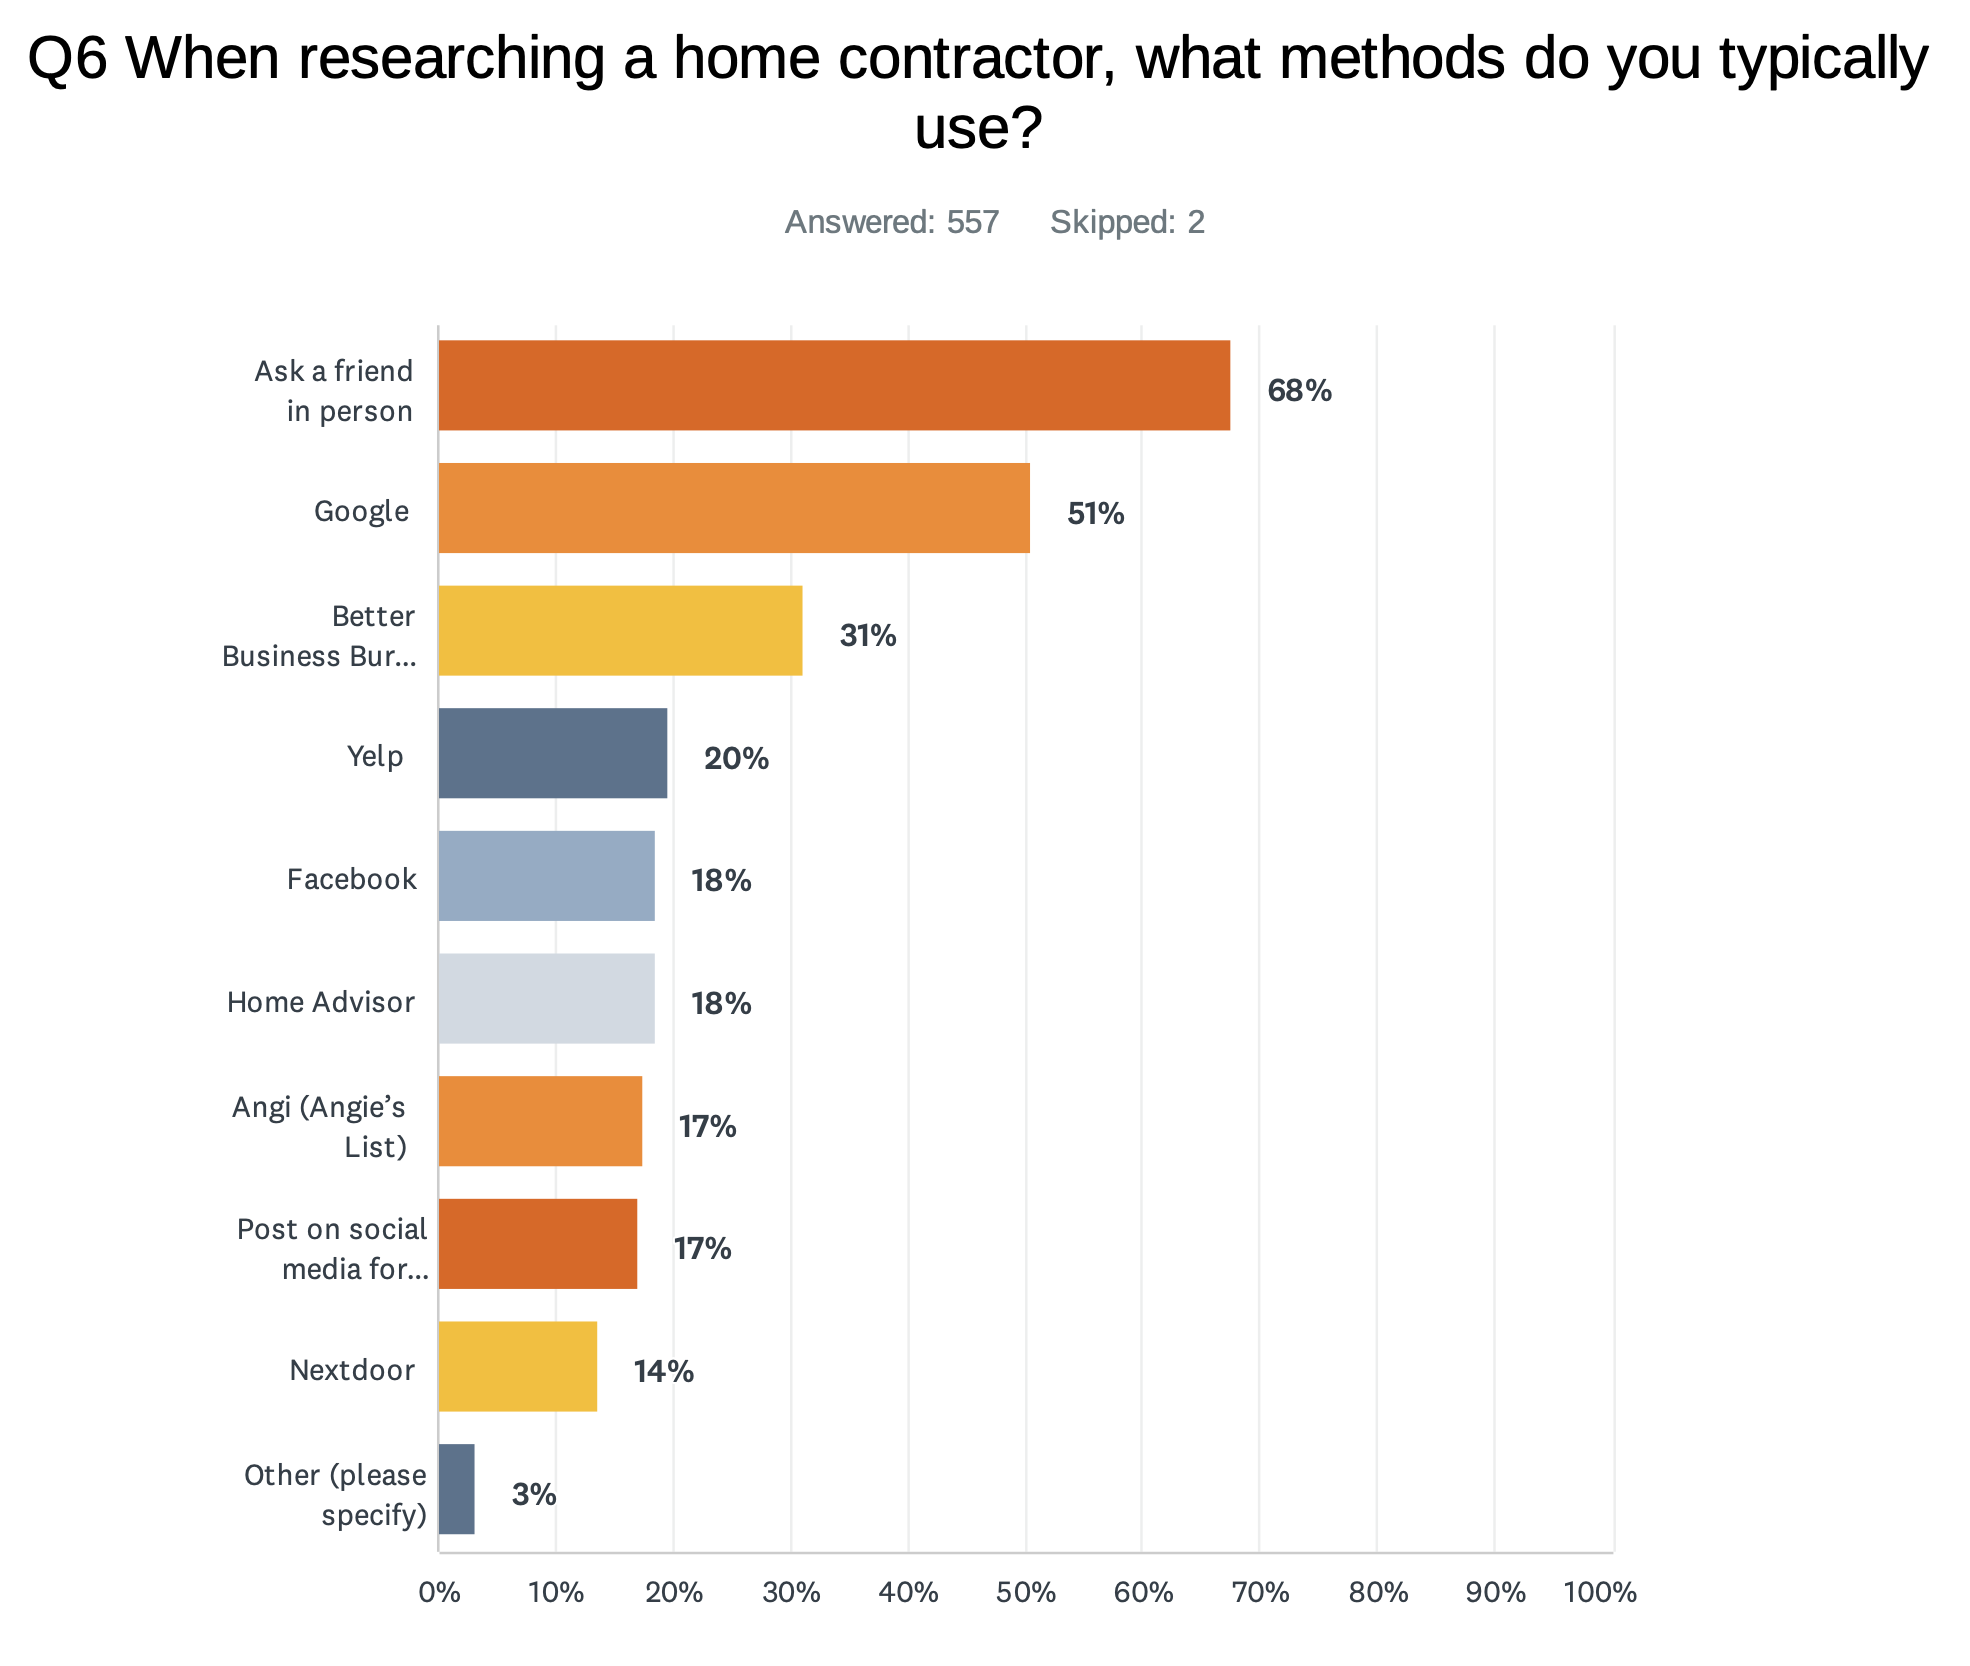 methods-used-researching-home-contractor